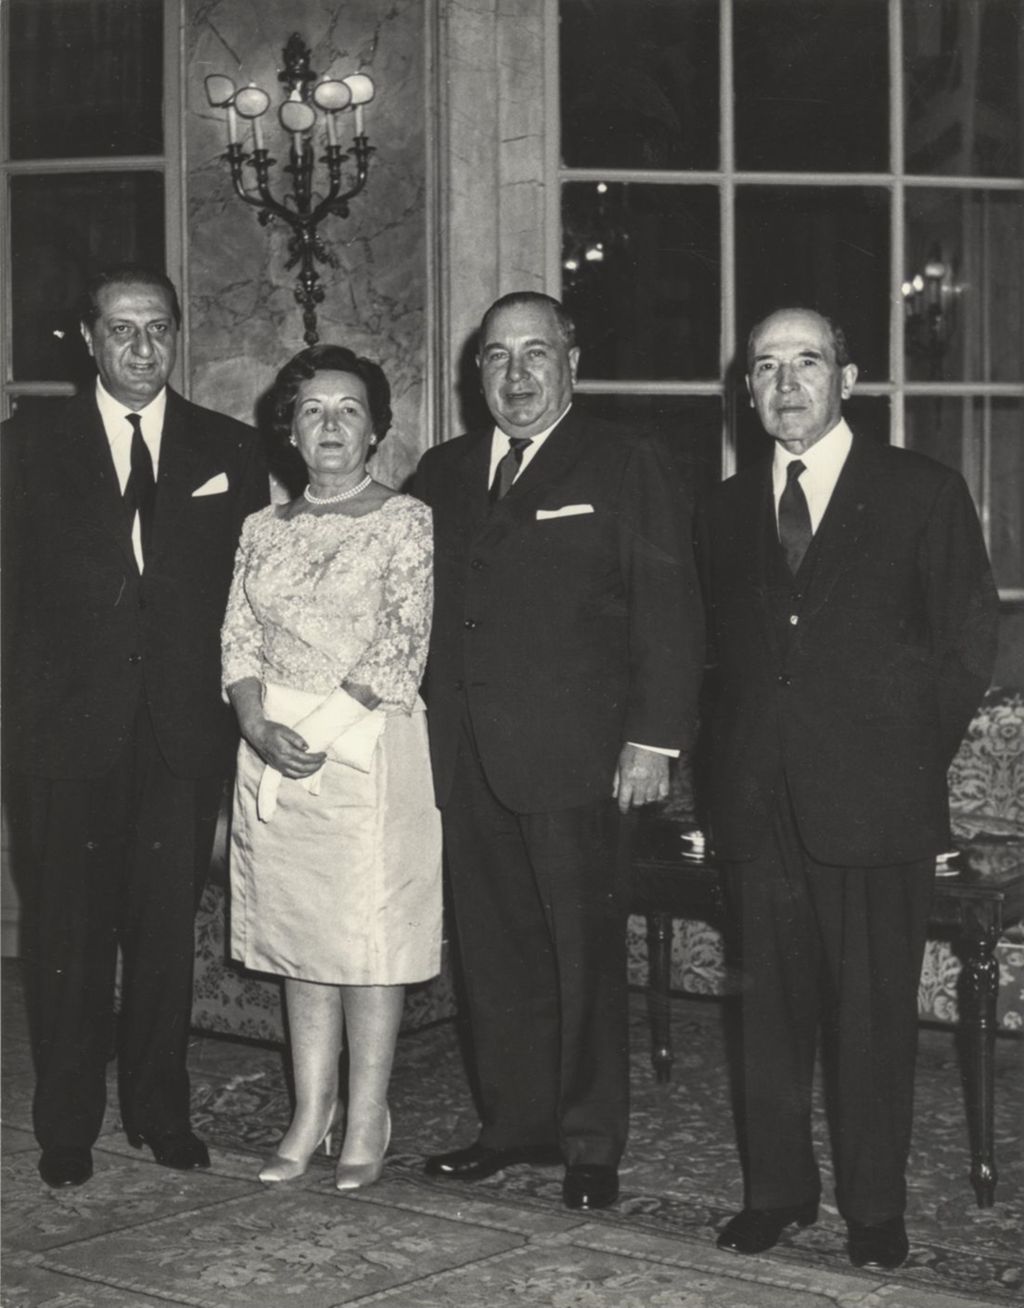 Miniature of Richard J. Daley and Eleanor Daley at a reception in Rome